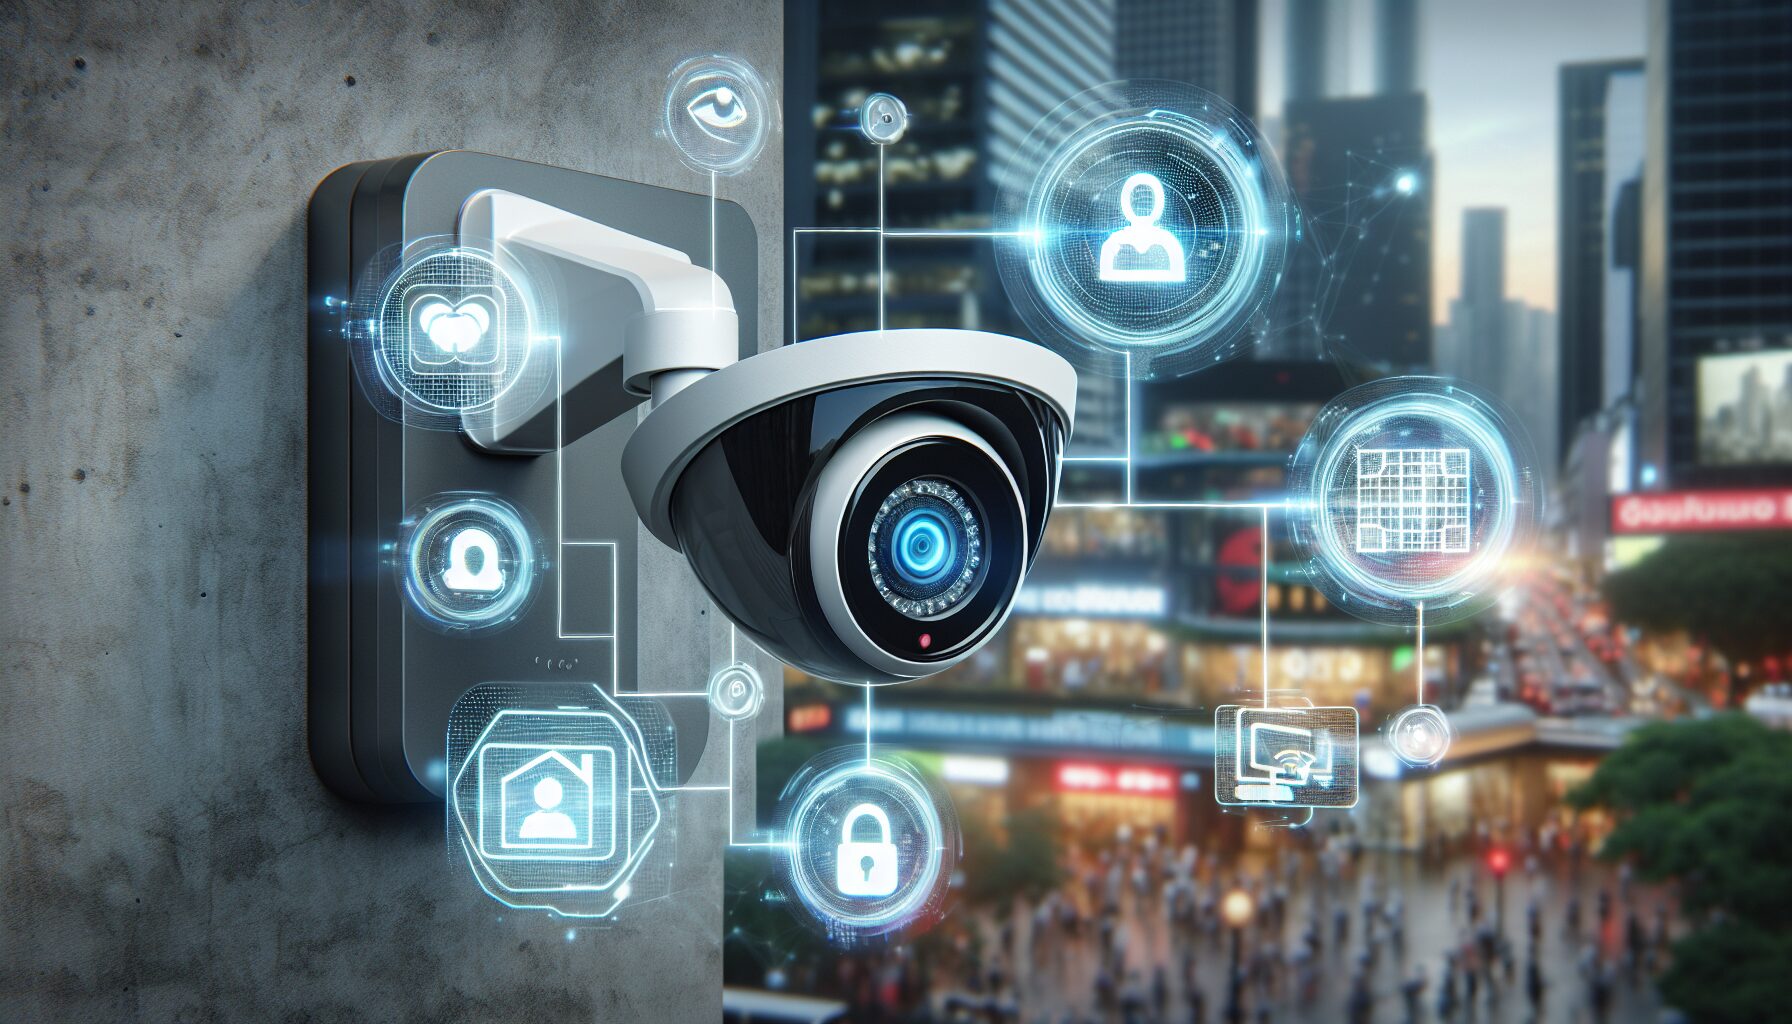 Smart features and integrations in modern CCTV security camera systems